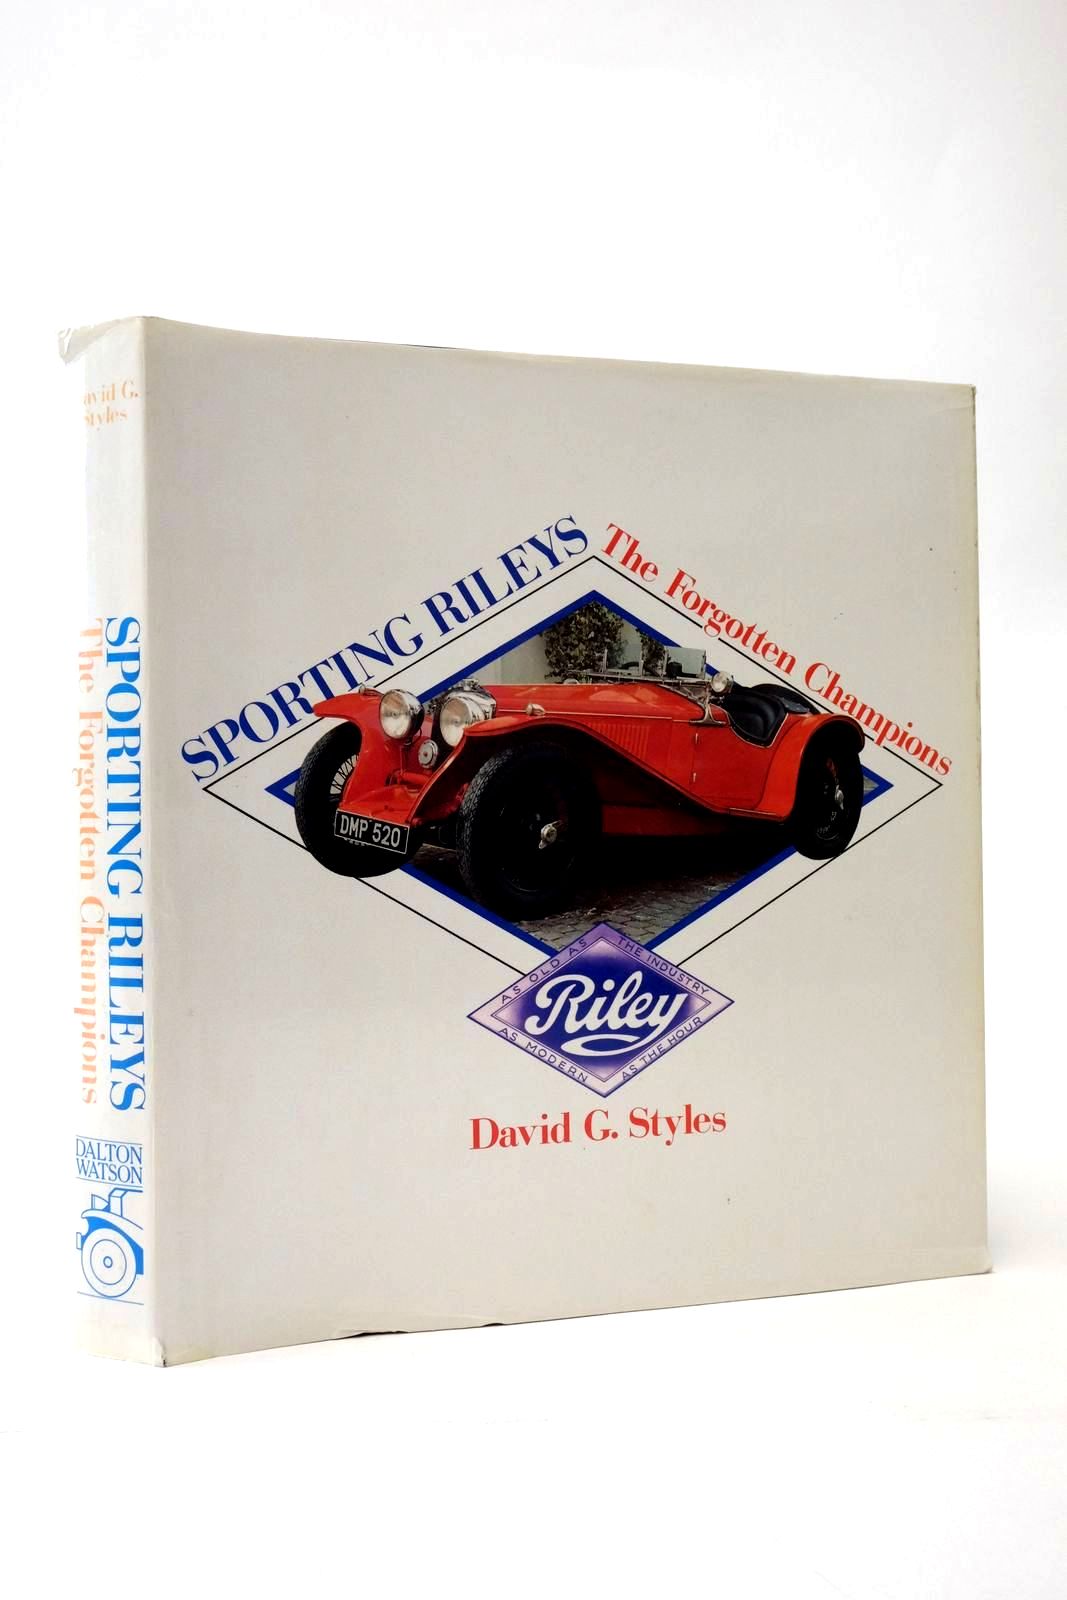 Photo of SPORTING RILEYS: THE FORGOTTEN CHAMPIONS written by Styles, David G. published by Dalton Watson (STOCK CODE: 2135600)  for sale by Stella & Rose's Books